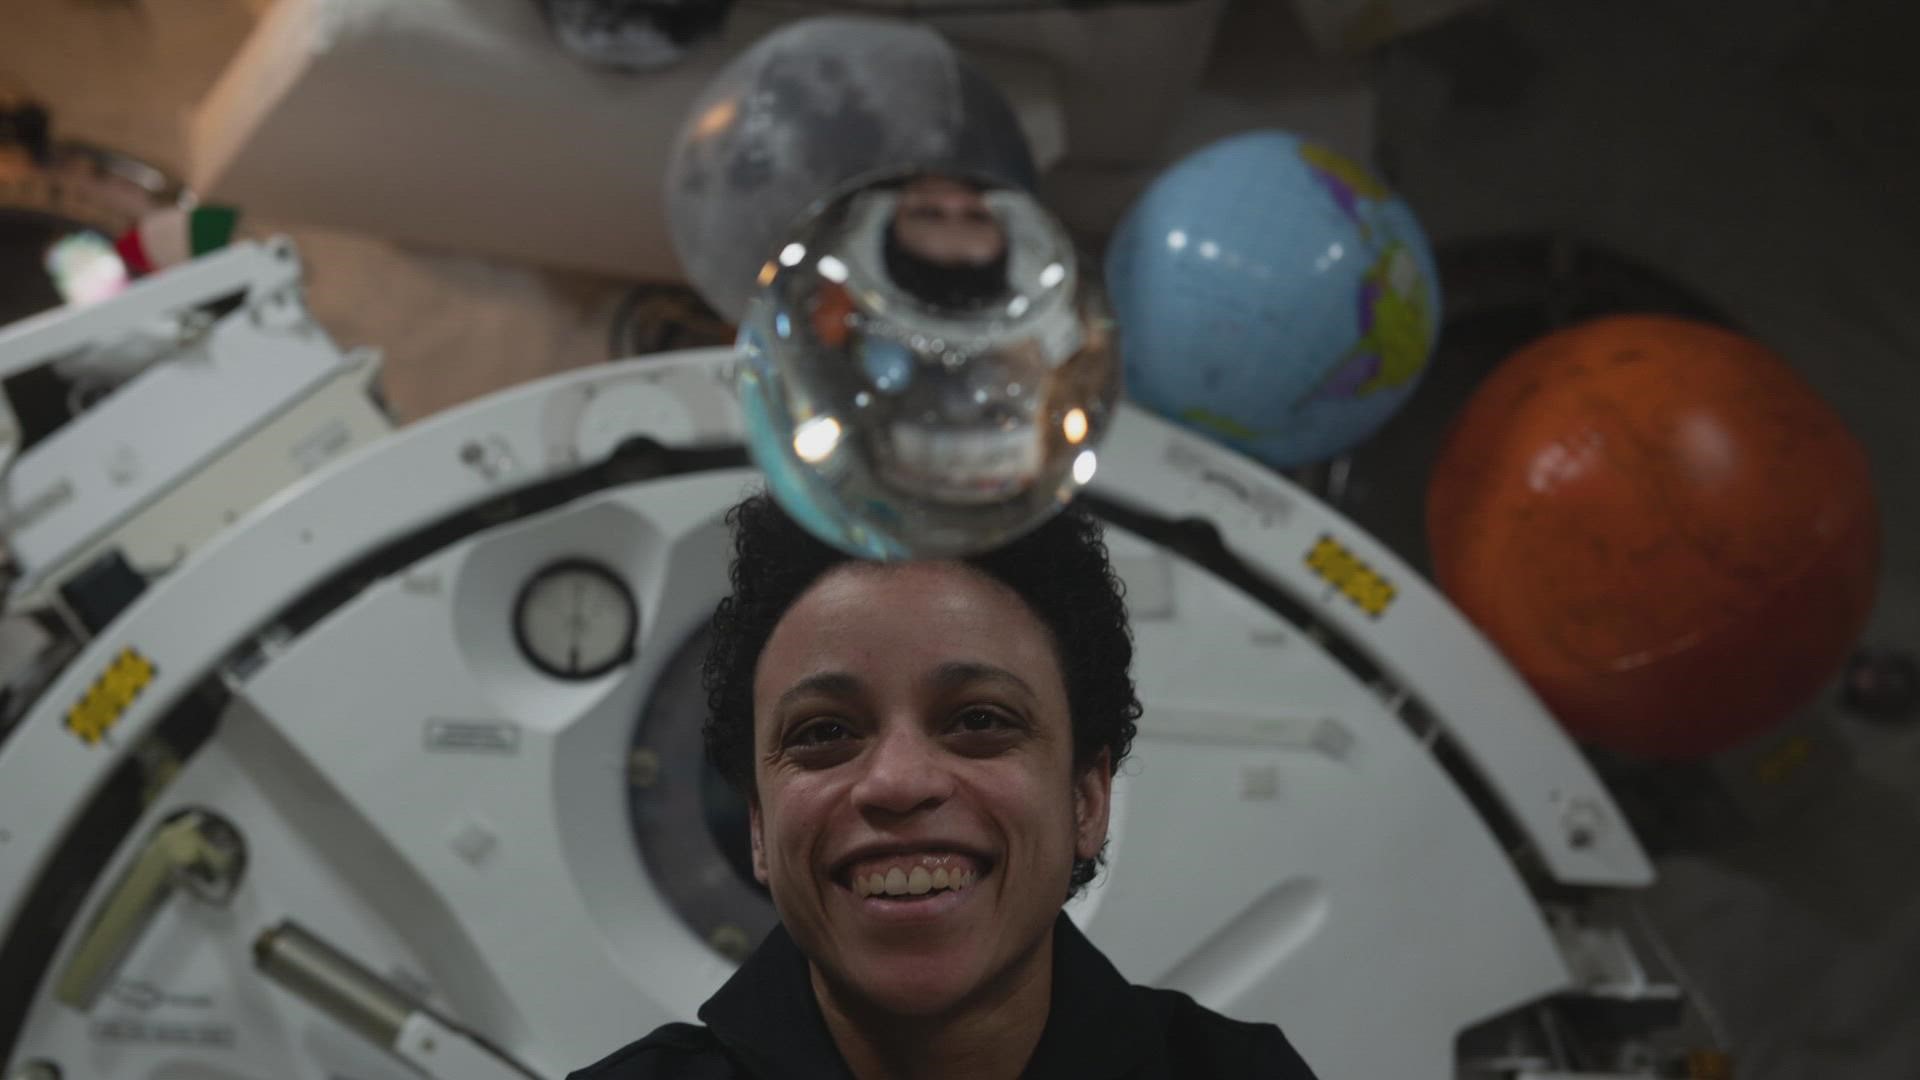 Lafayette Native and Fairview High School Grad Jessica Watkins is back on earth after nearly six months on the International Space Station.